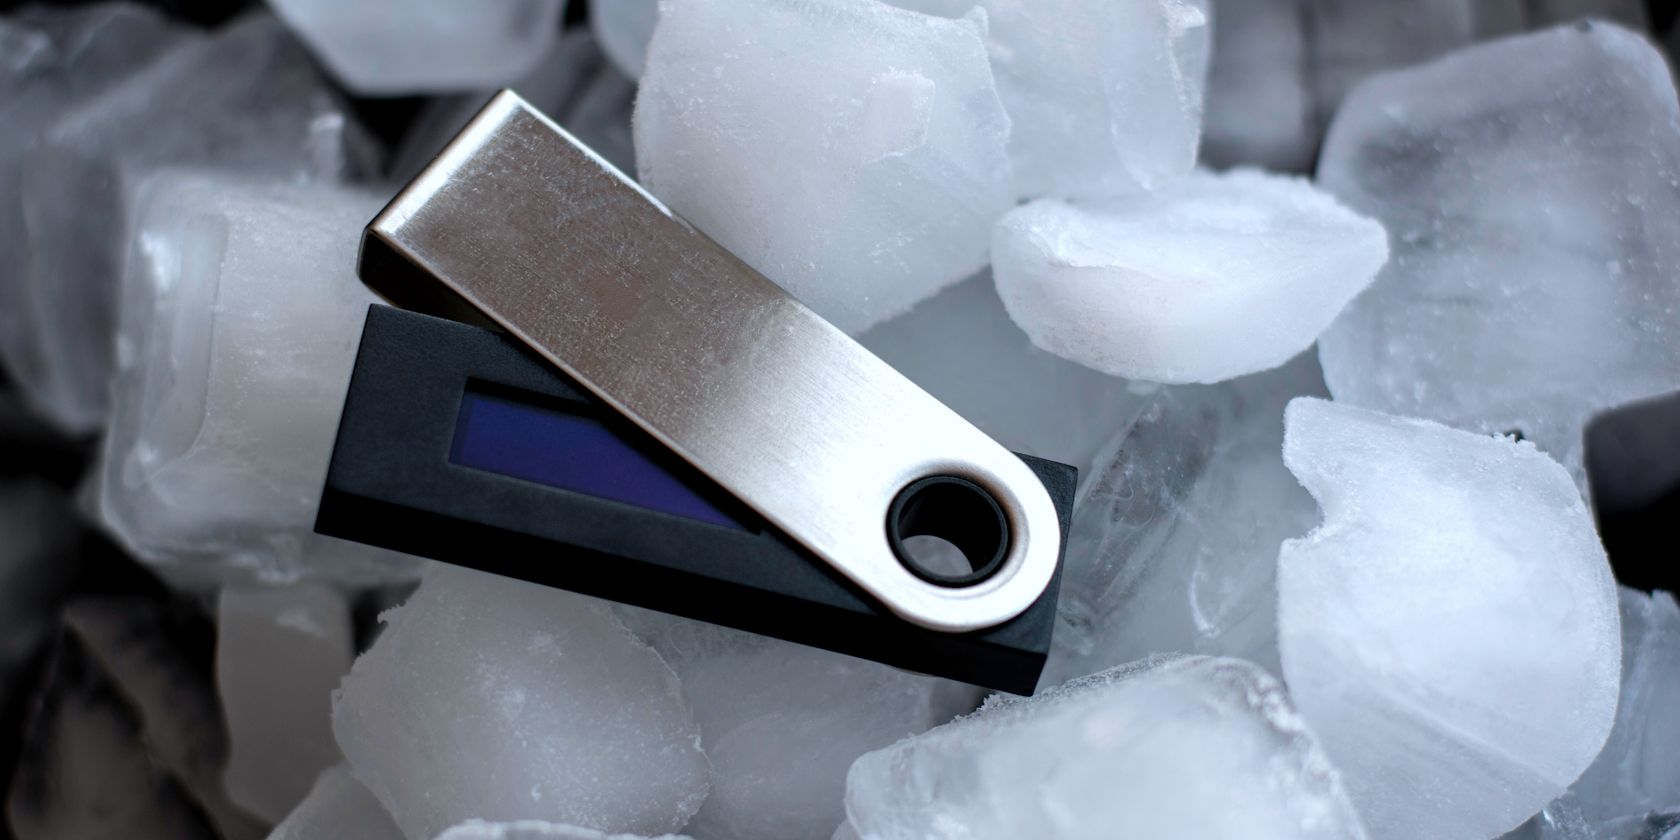 crypto cold storage wallet on ice cubes feature